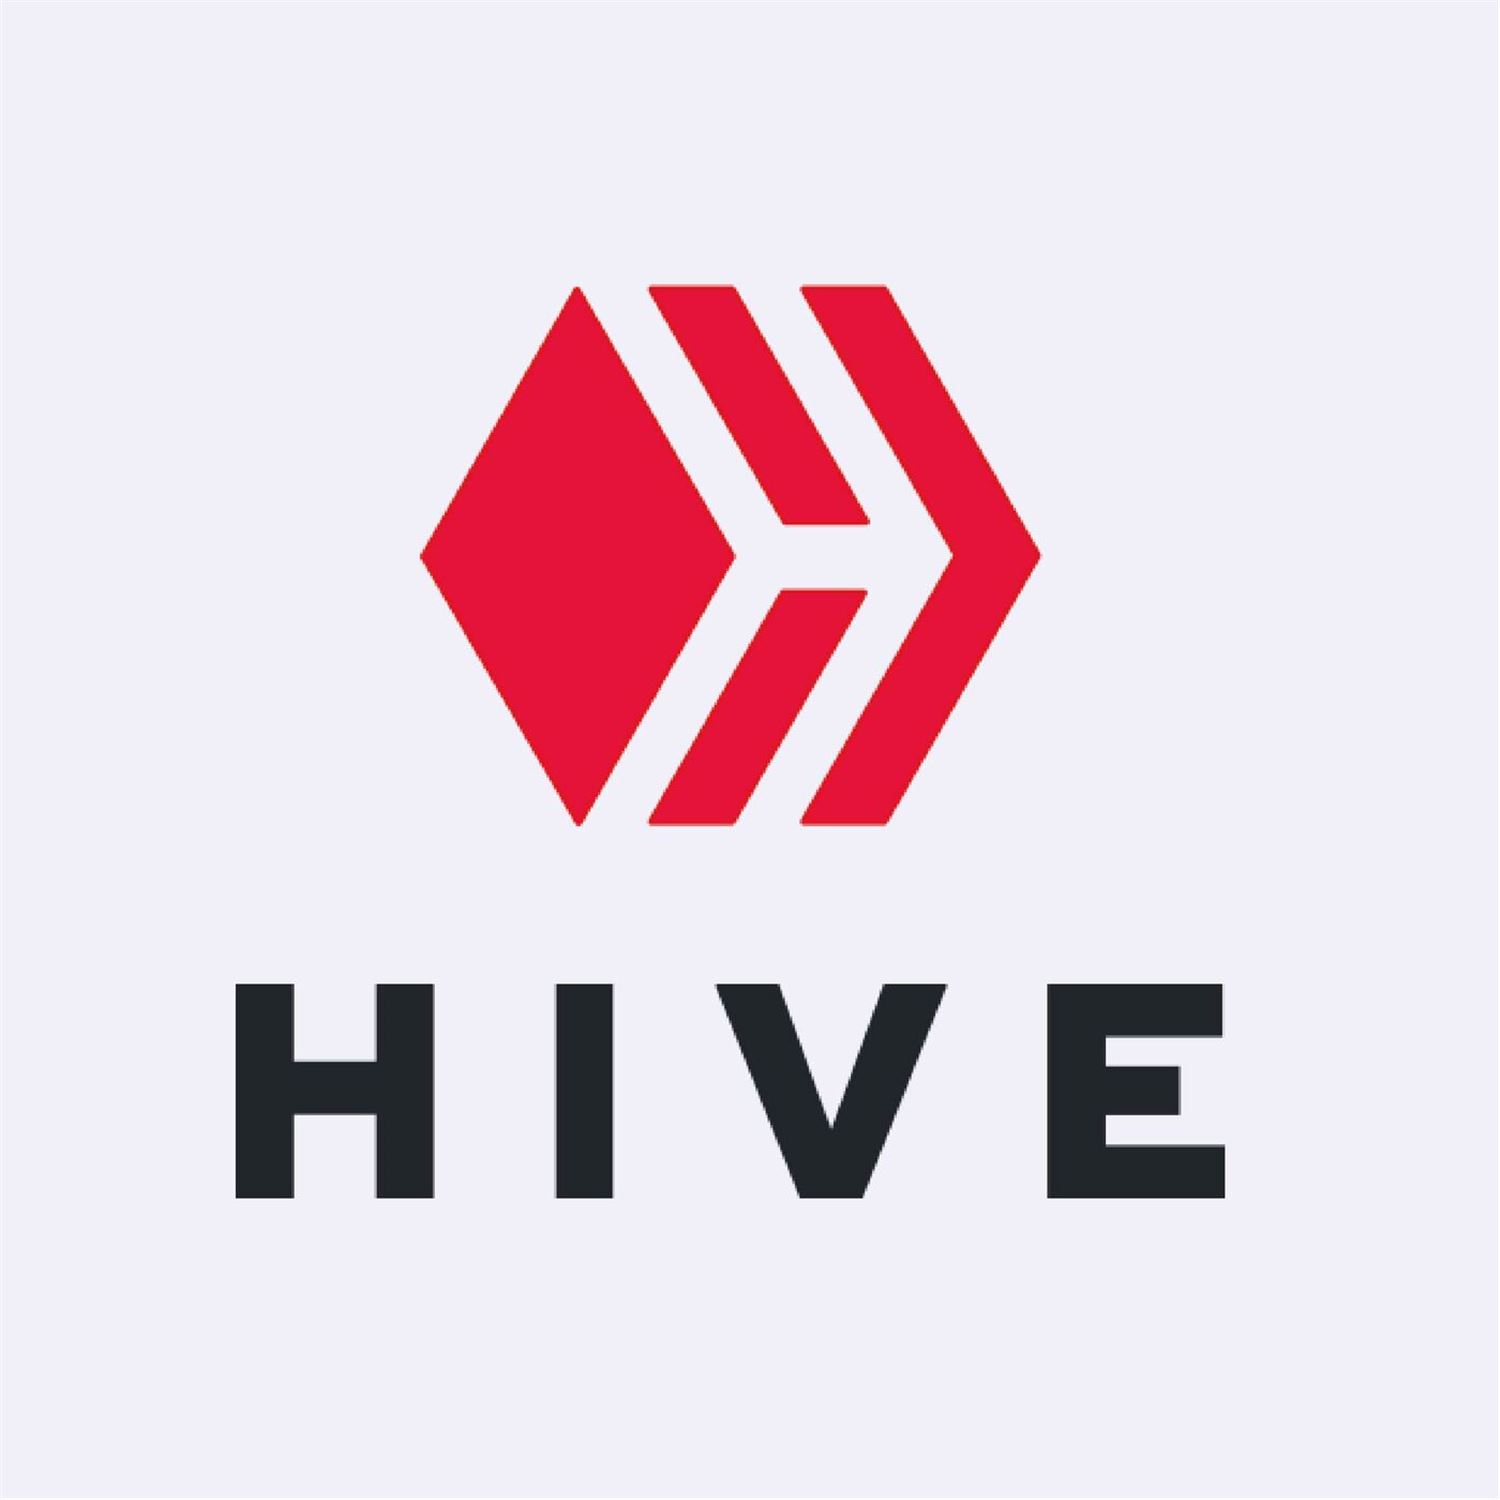 The birth of HIVE